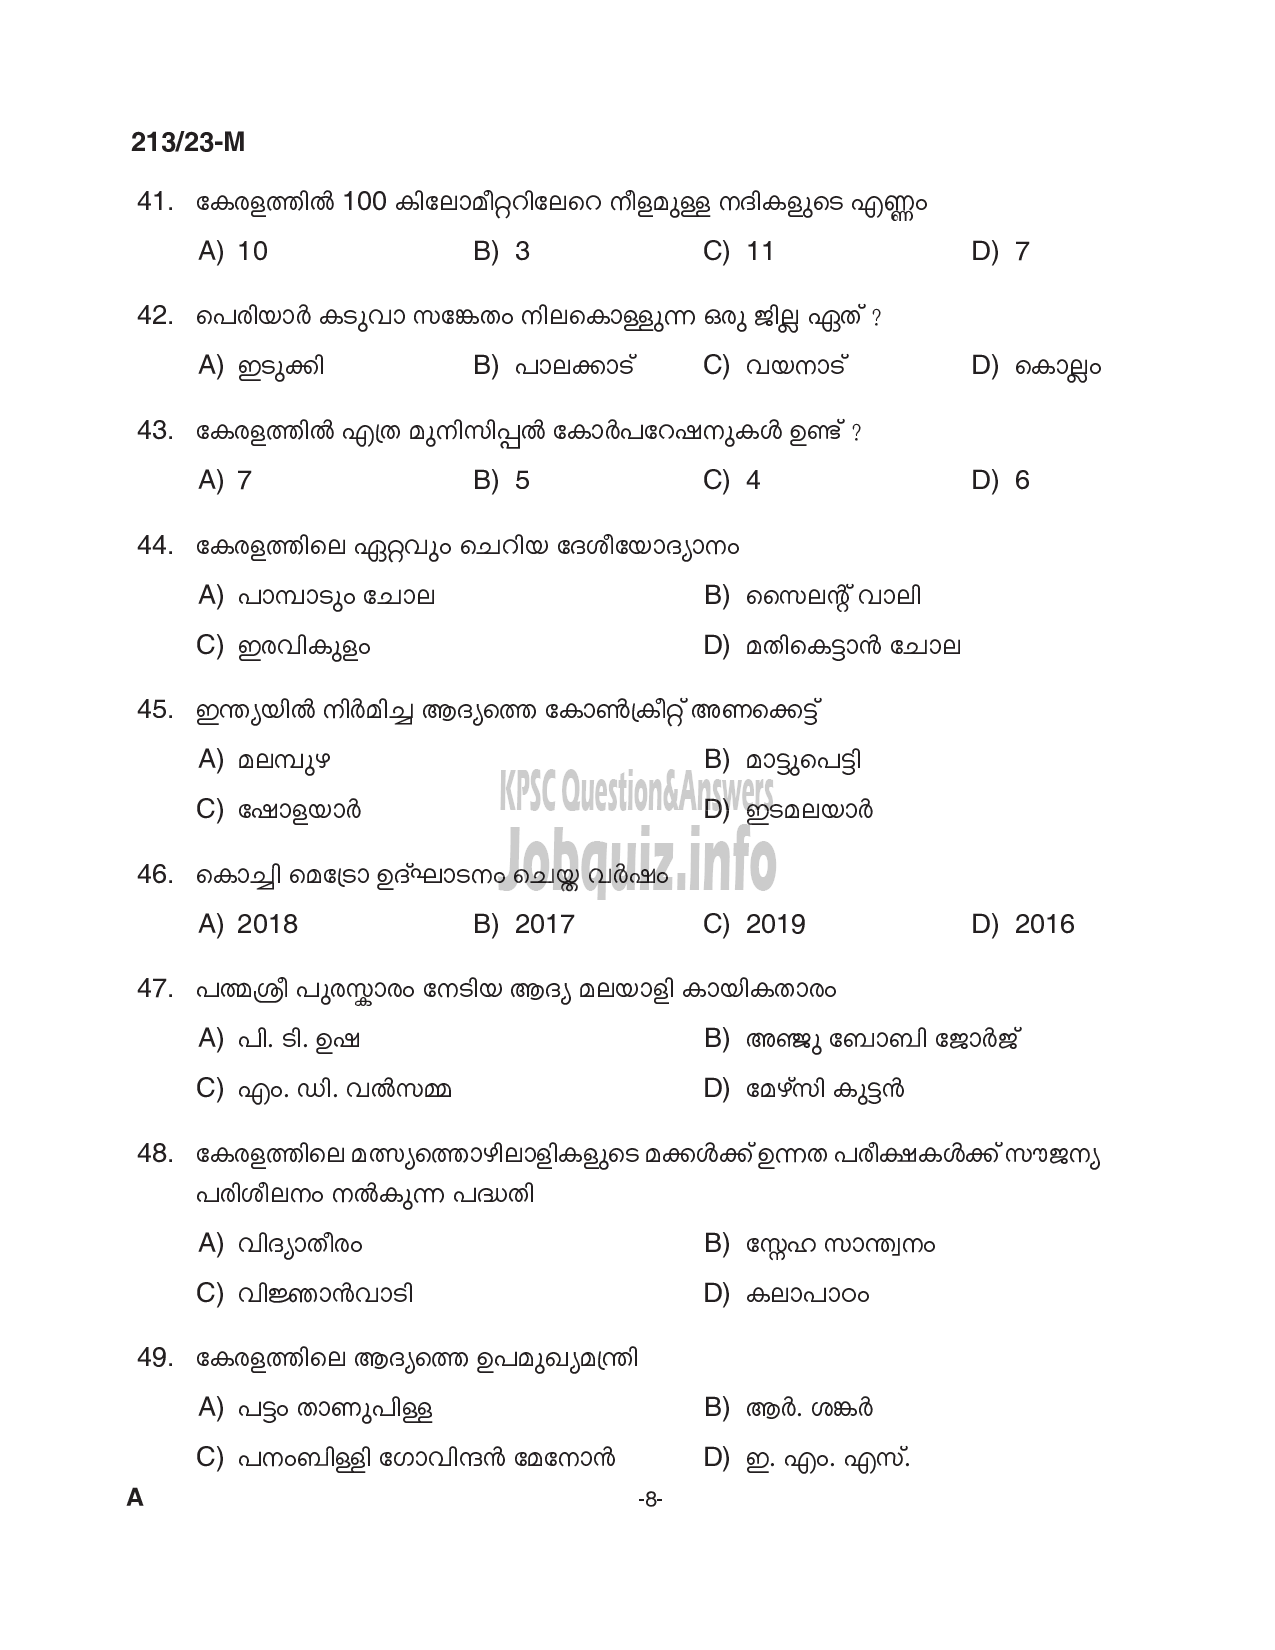 Kerala PSC Question Paper - Cooly Worker, LGS, Office Attendant Gr II/ Messenger/ Night Watchman, Farm Worker, Ambulance Assistant (Preliminary Examination Stage V) -8